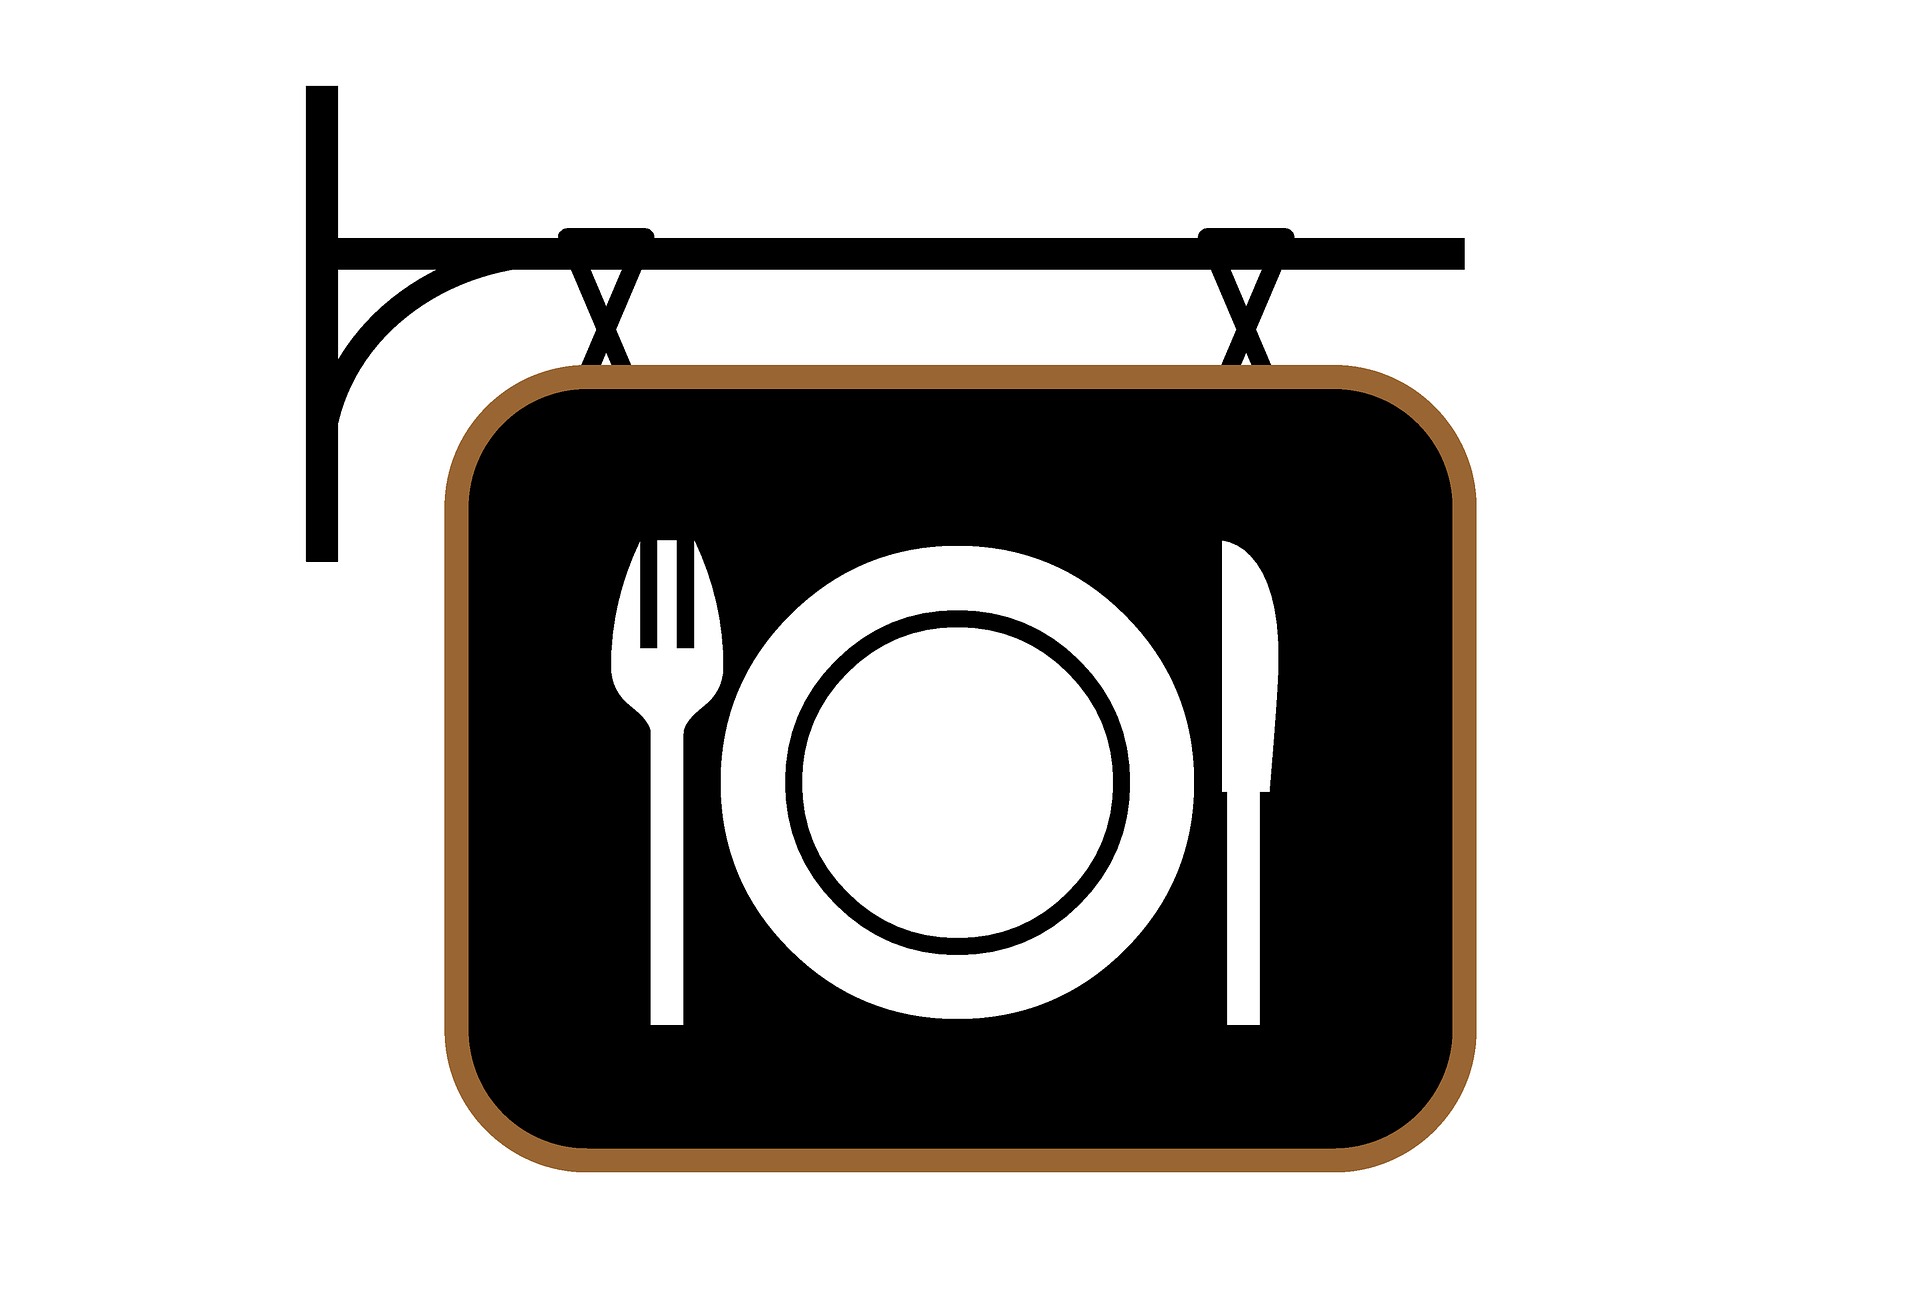 restaurant-g281cce87c_1920.png